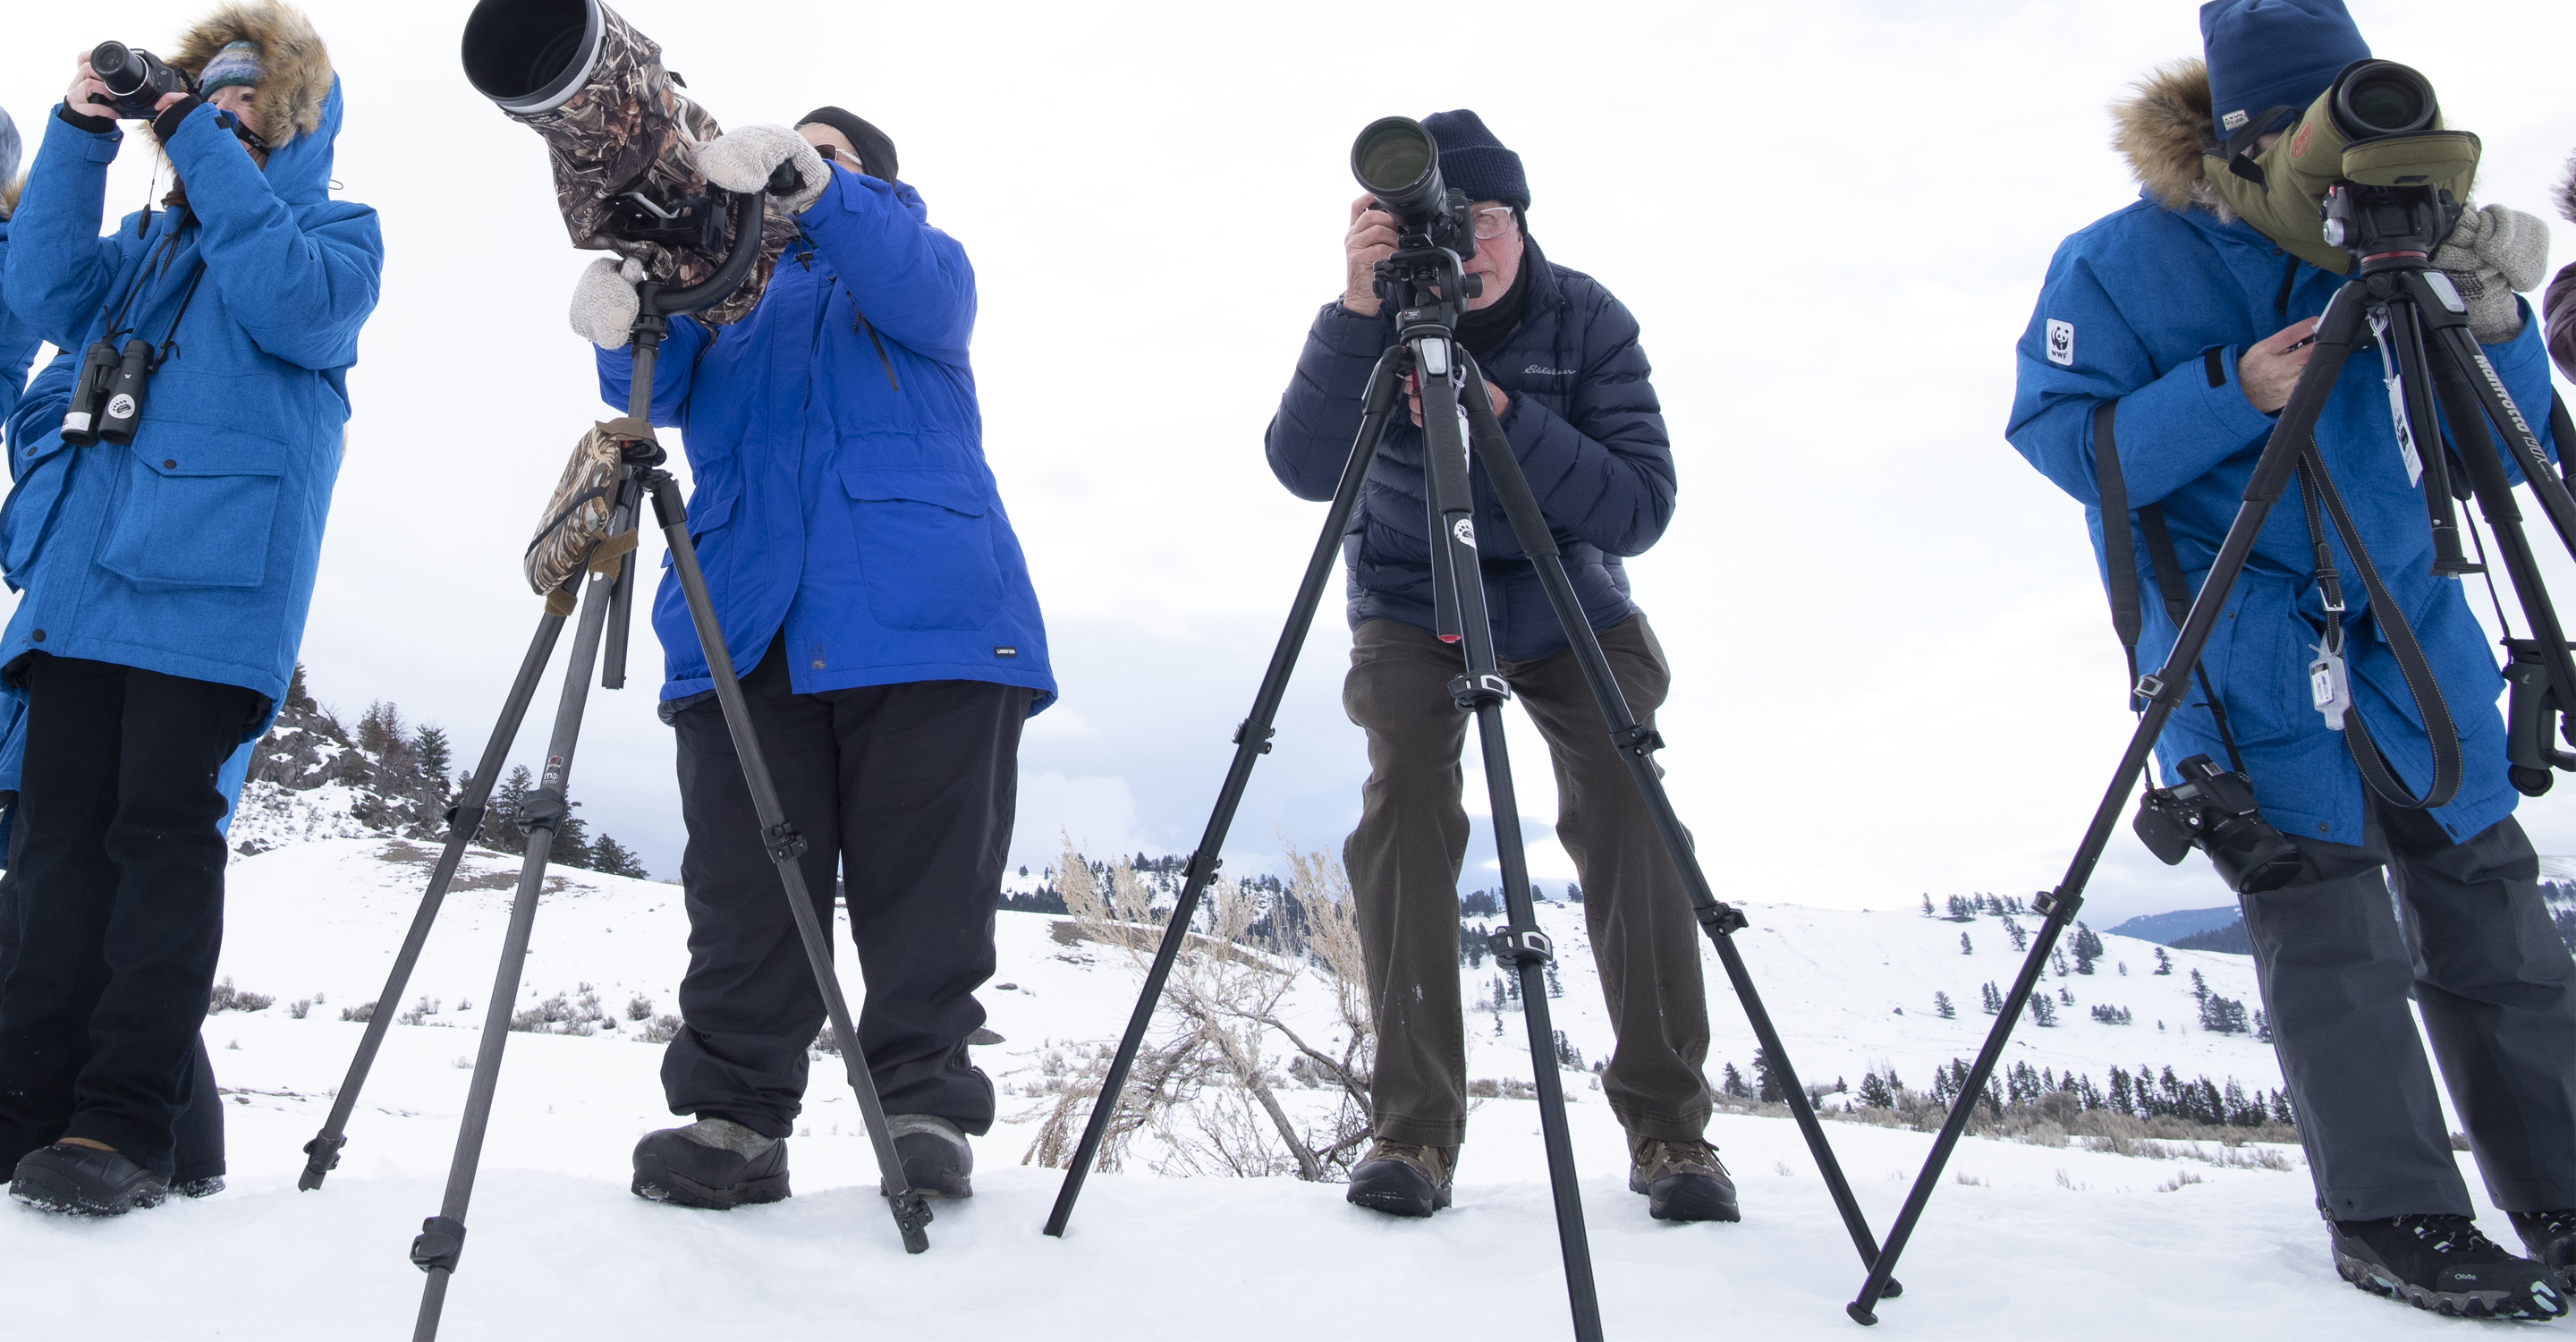 Natural Habitat Adventures travelers view wildlife through a scope in Yellowstone National Park, United States